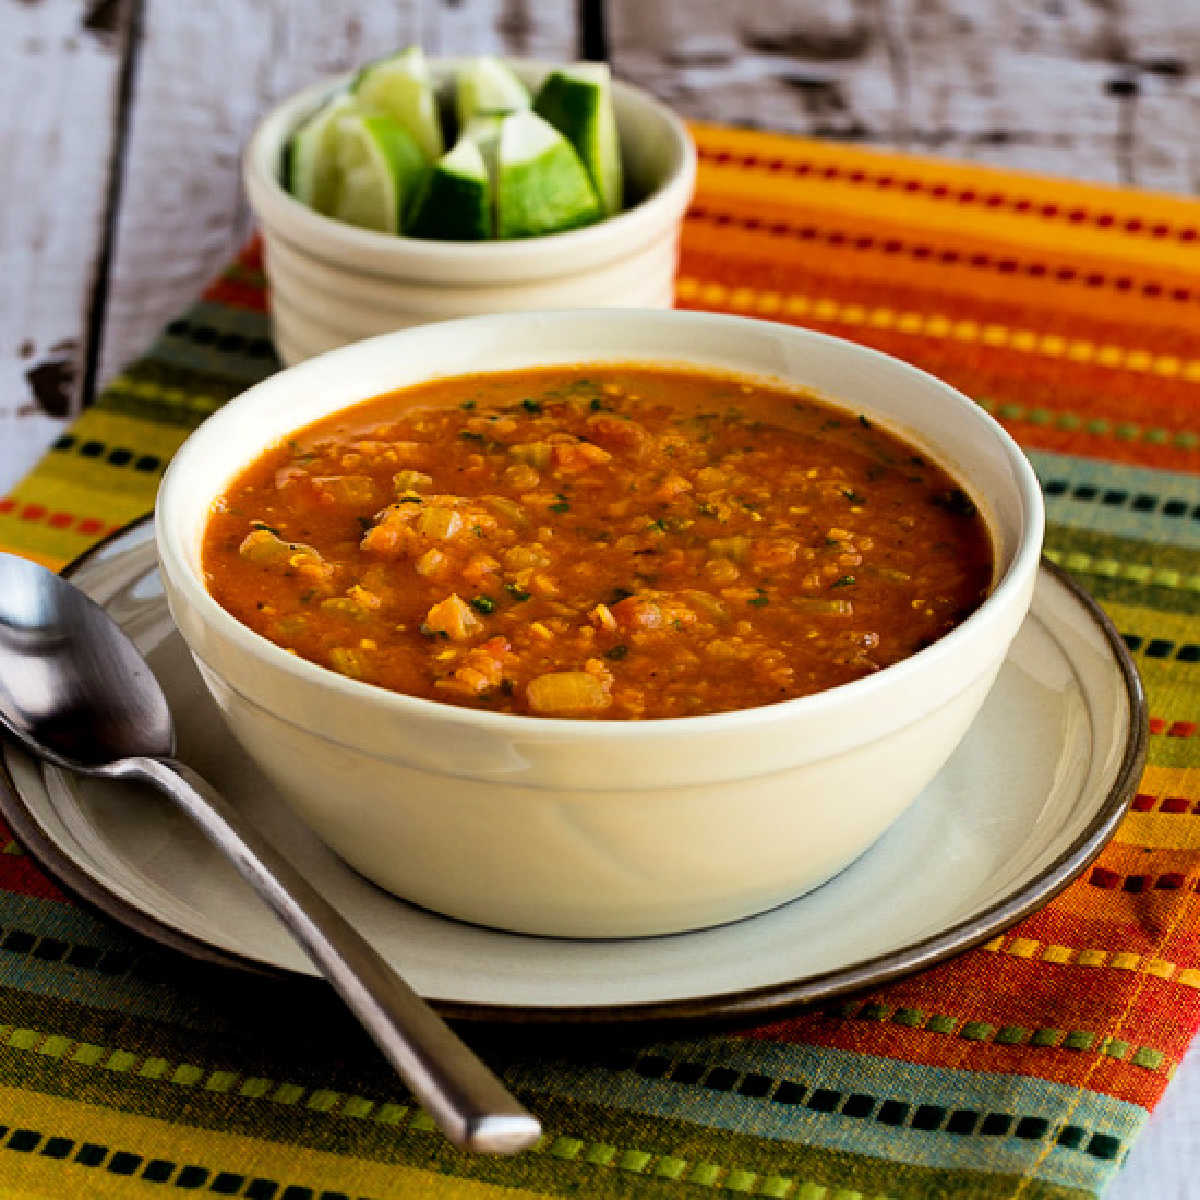 Square image of Mexican Red Lentil Stew in serving bowl on napkin, with limes in background.